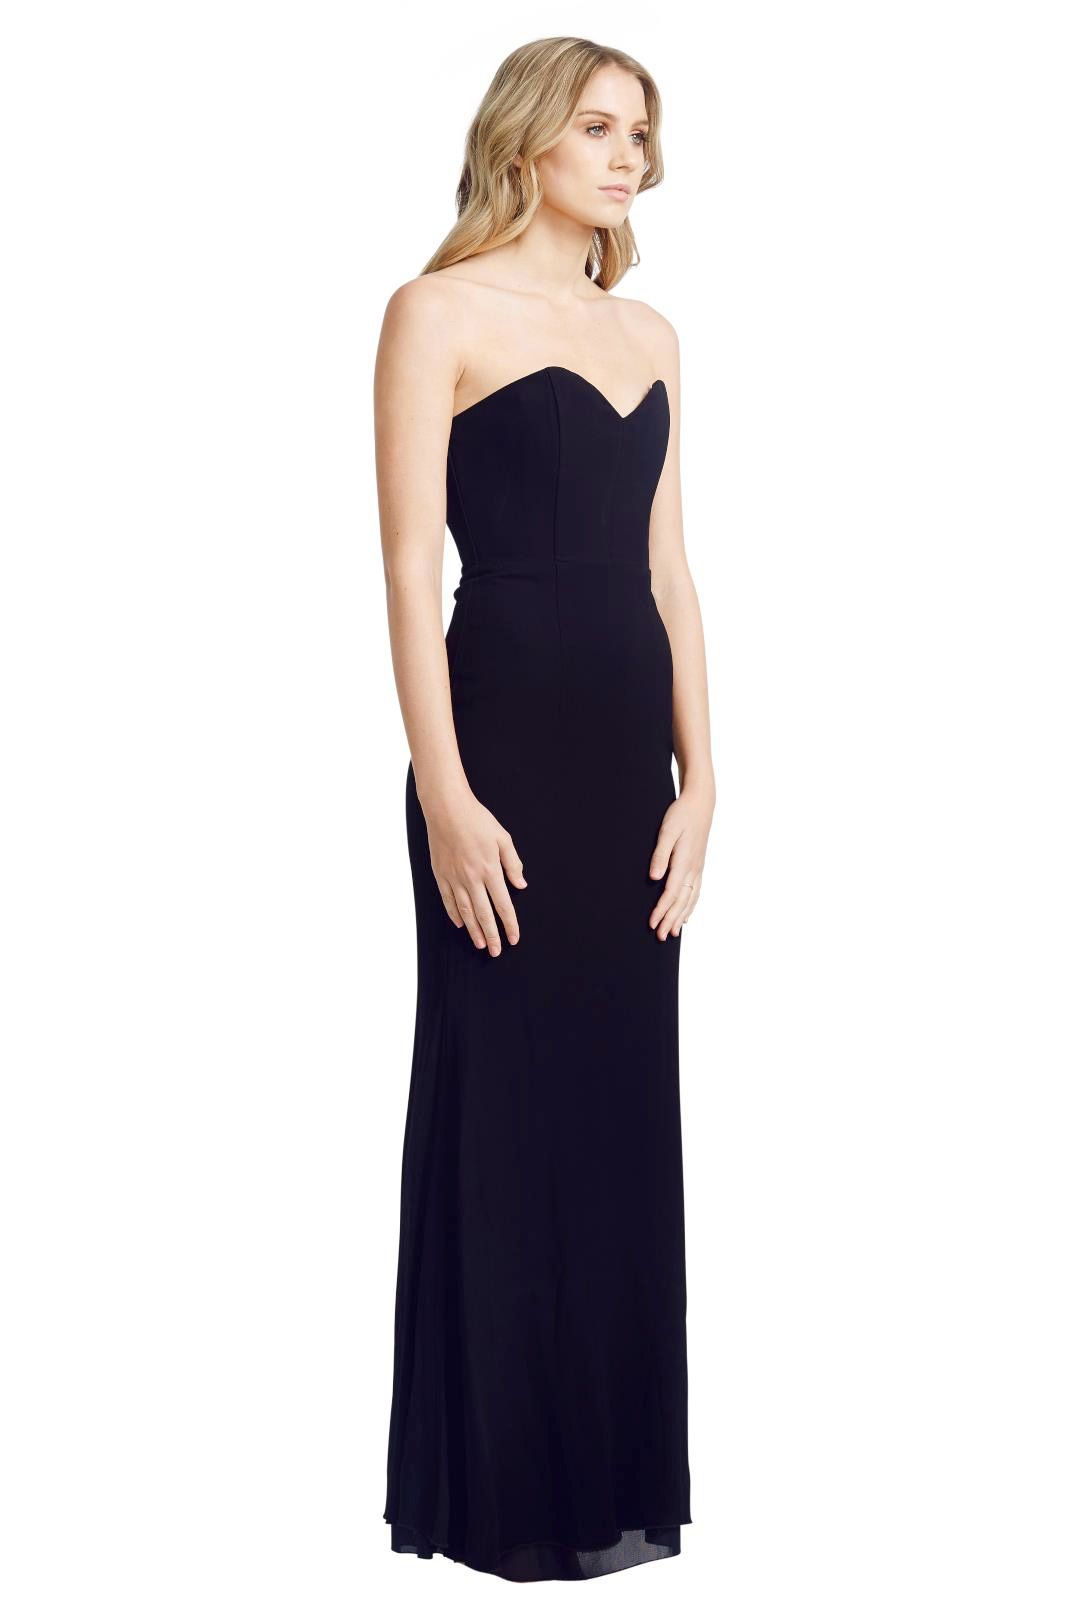 Alex Perry - Louise Gown - Black - Side